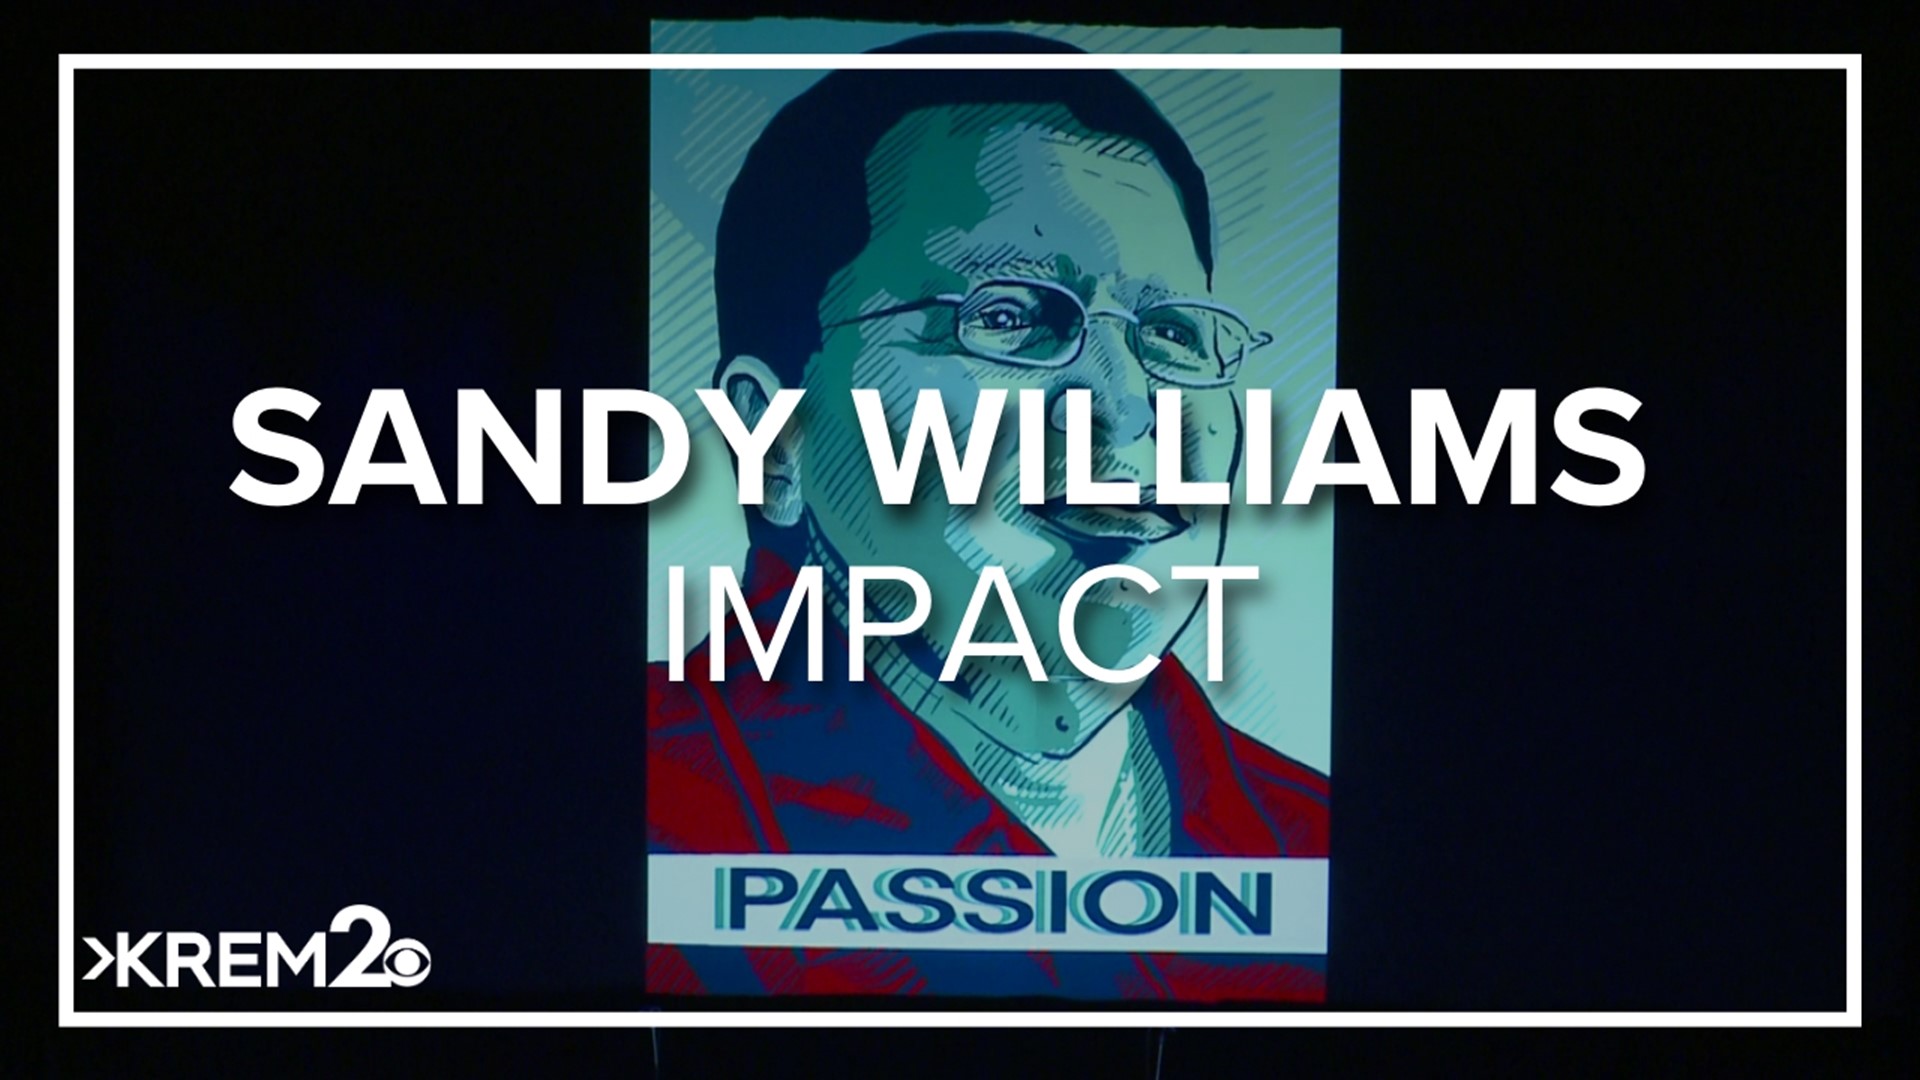 One year after the deadly plane crash, friends and family remember Sandy Williams as a trailblazer in Spokane.